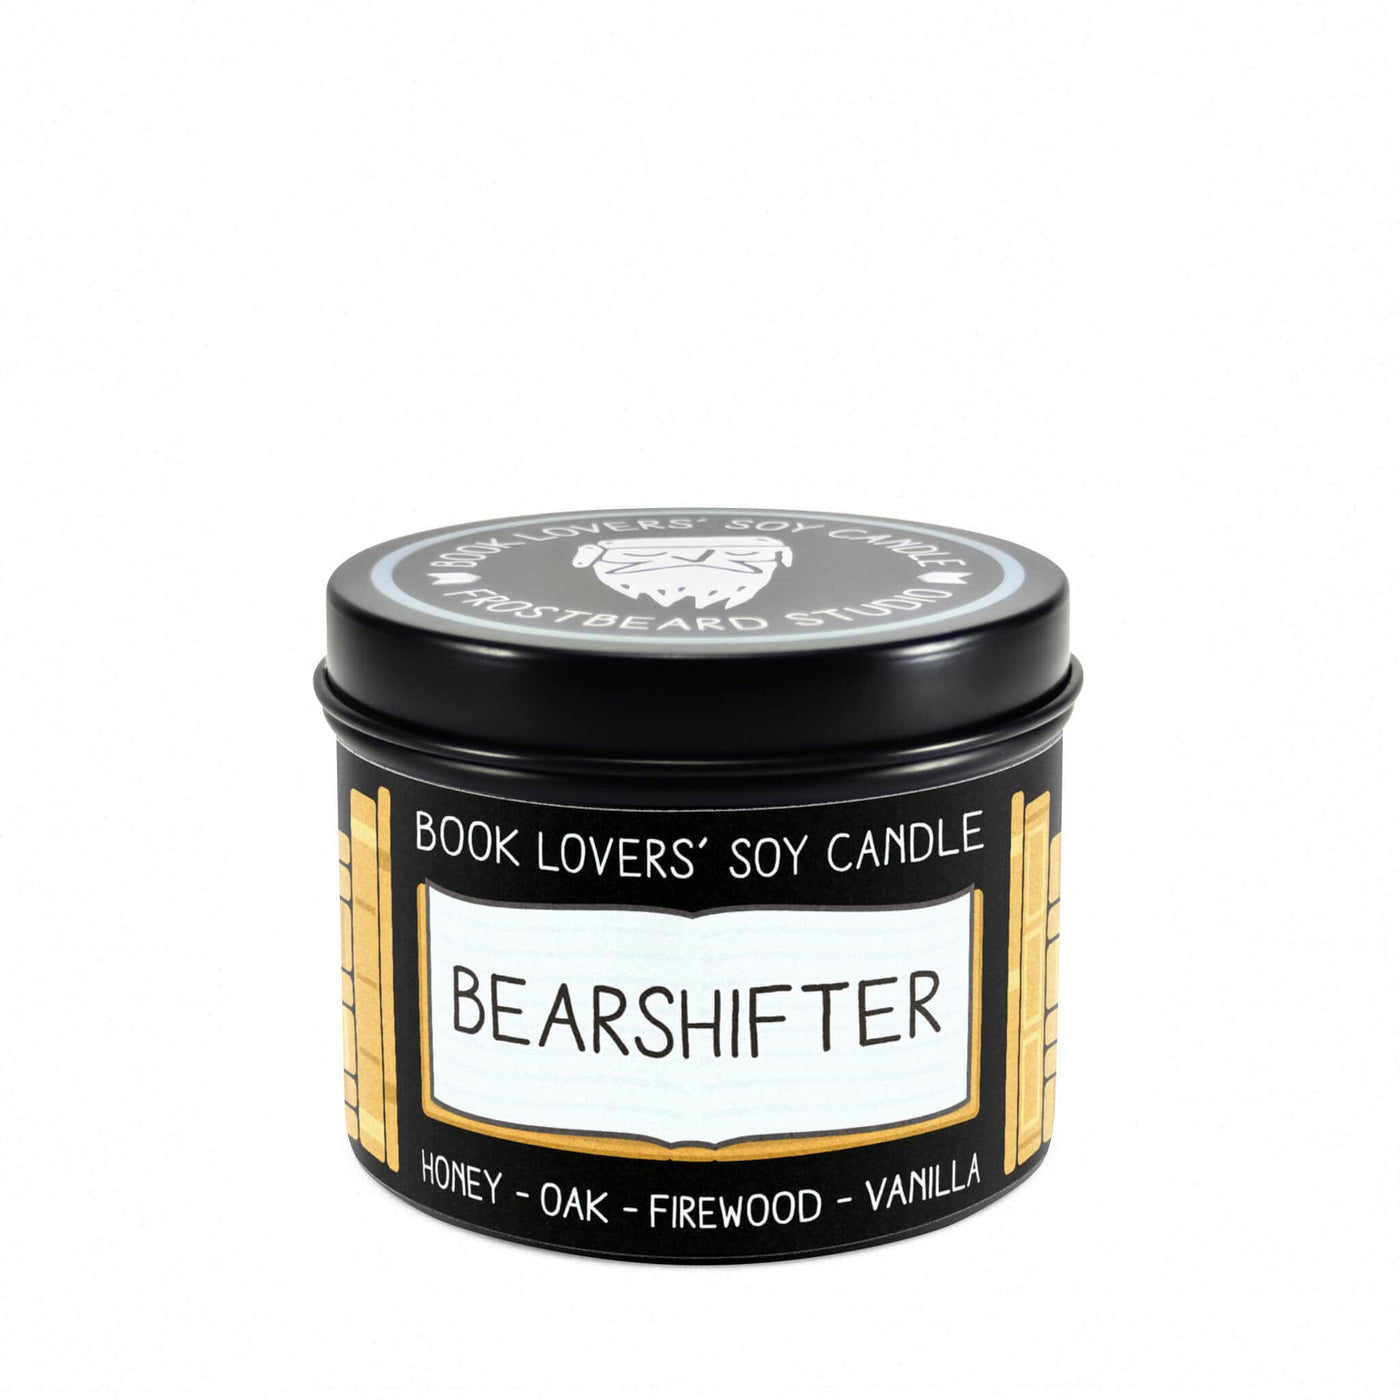 Bearshifter  -  4 oz Tin  -  Book Lovers' Soy Candle  -  Frostbeard Studio